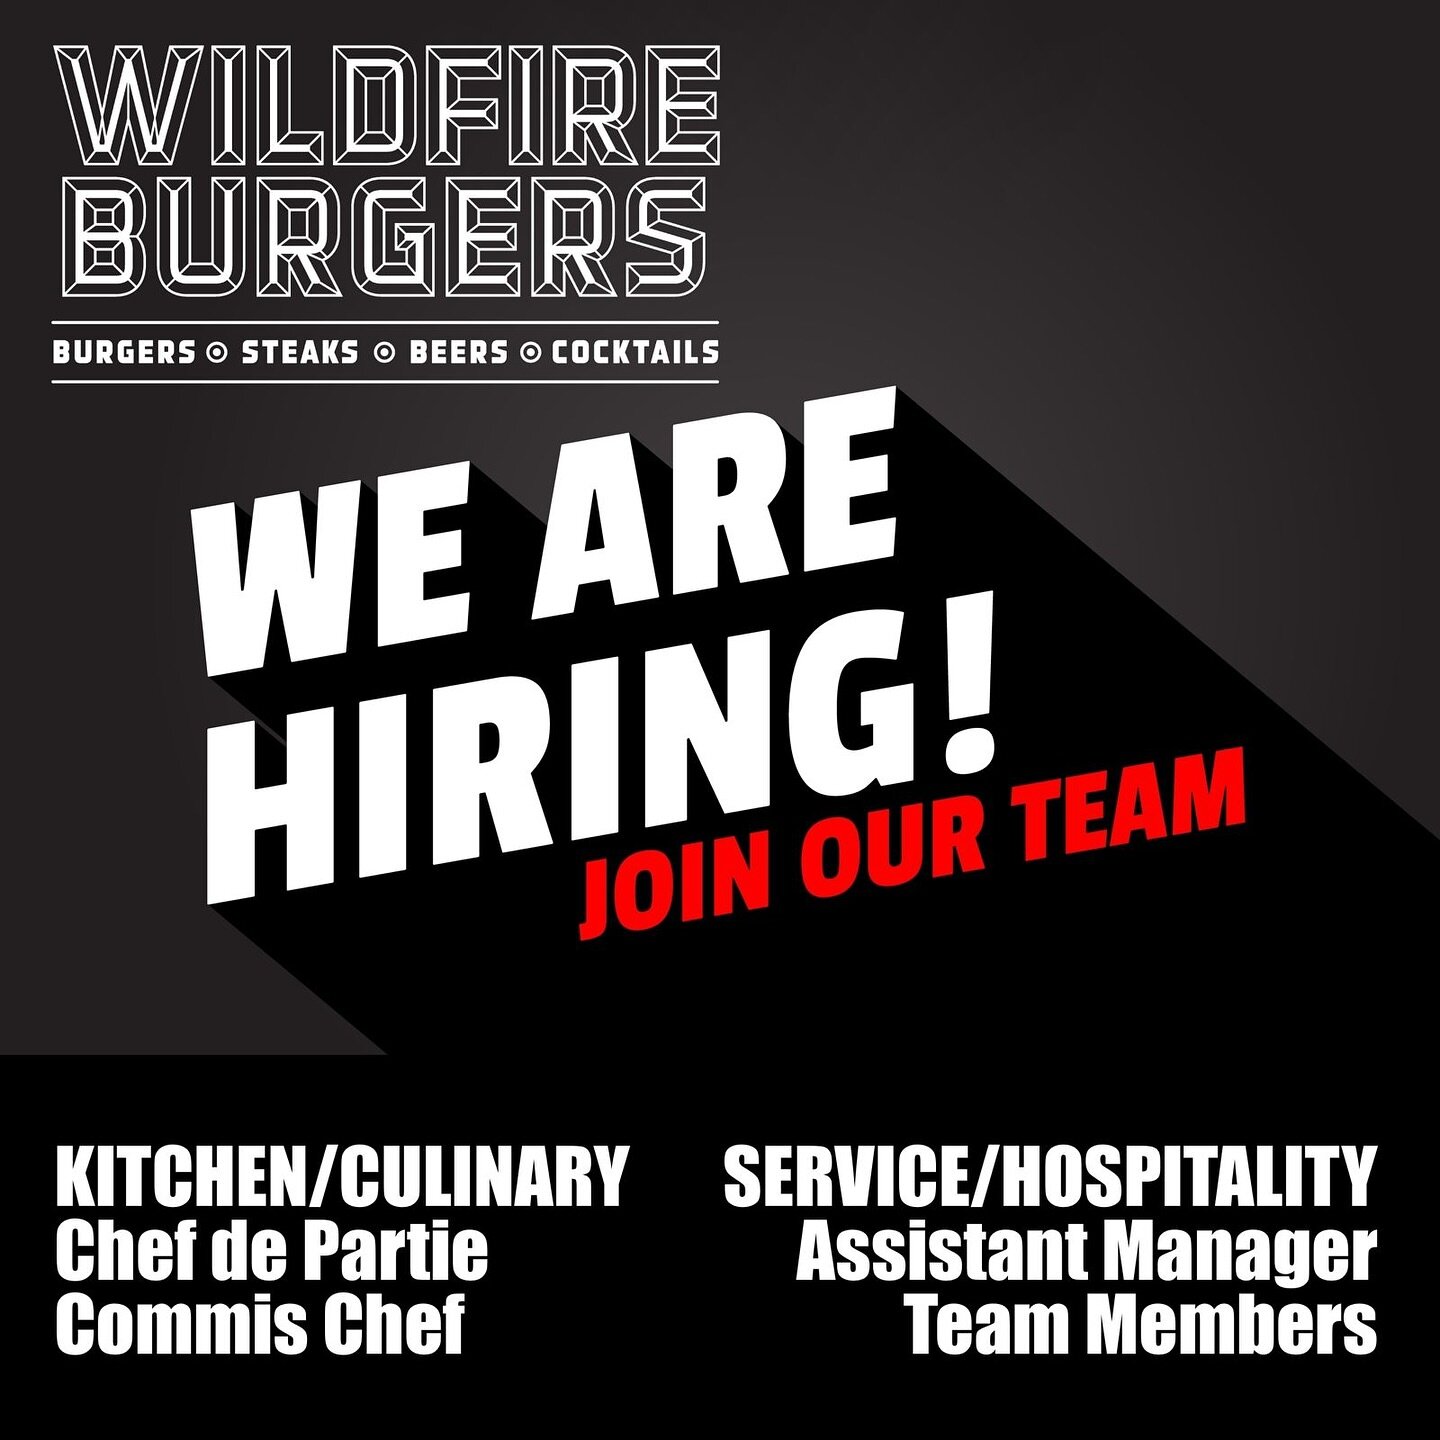 Now Hiring! 

This is no ordinary burger &ldquo;joint&rdquo;. Yes it&rsquo;s casual and fun but we believe in culinary excellence and &ldquo;unreasonable hospitality&rdquo; and as such we are looking for passionate motivated individuals to join us on